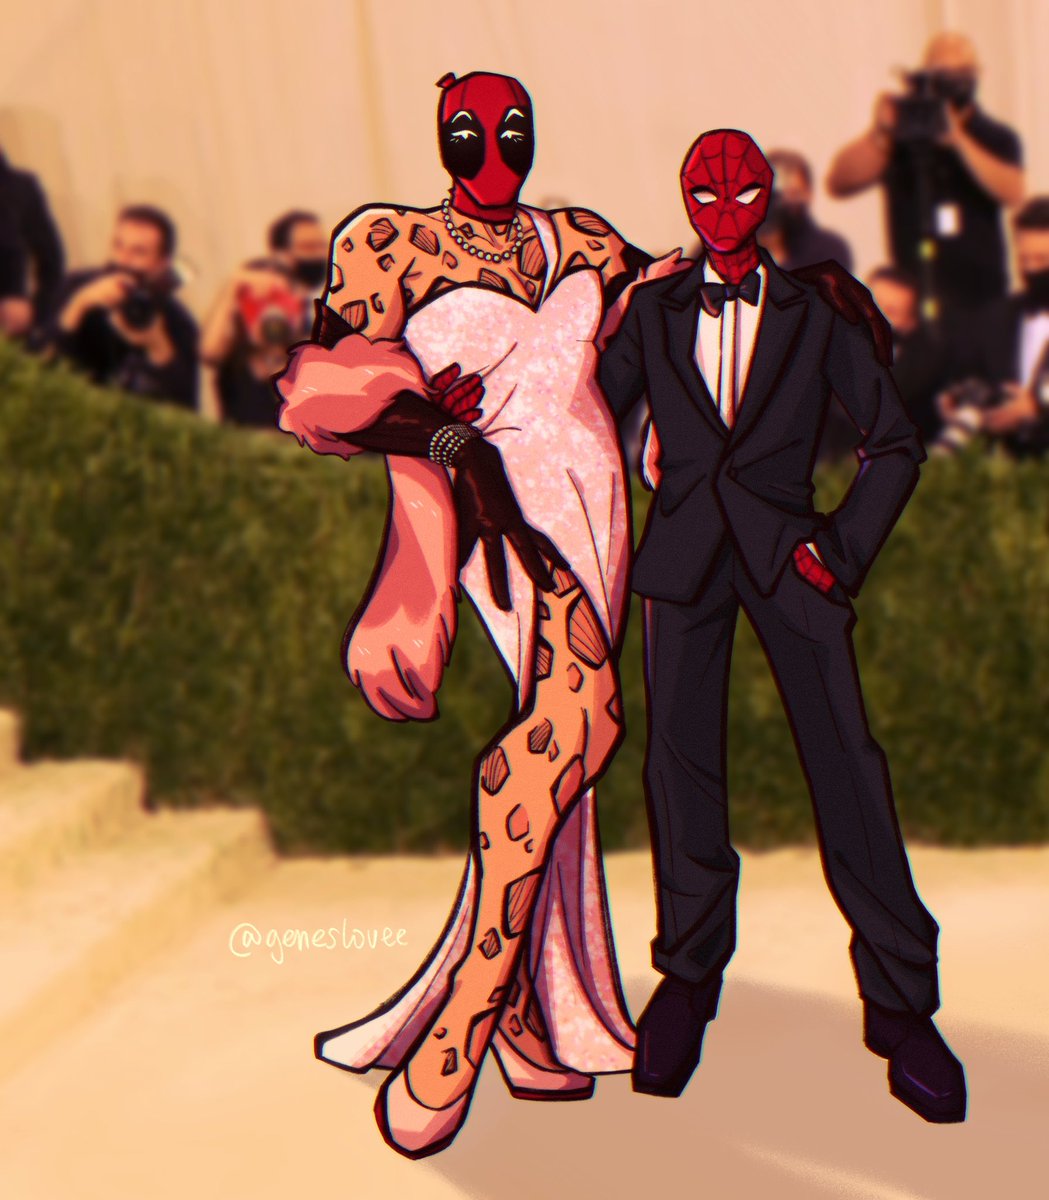 RT @geneslovee: if deadpool and spider-man were invited to #metgala .... https://t.co/r4OCy2x01i